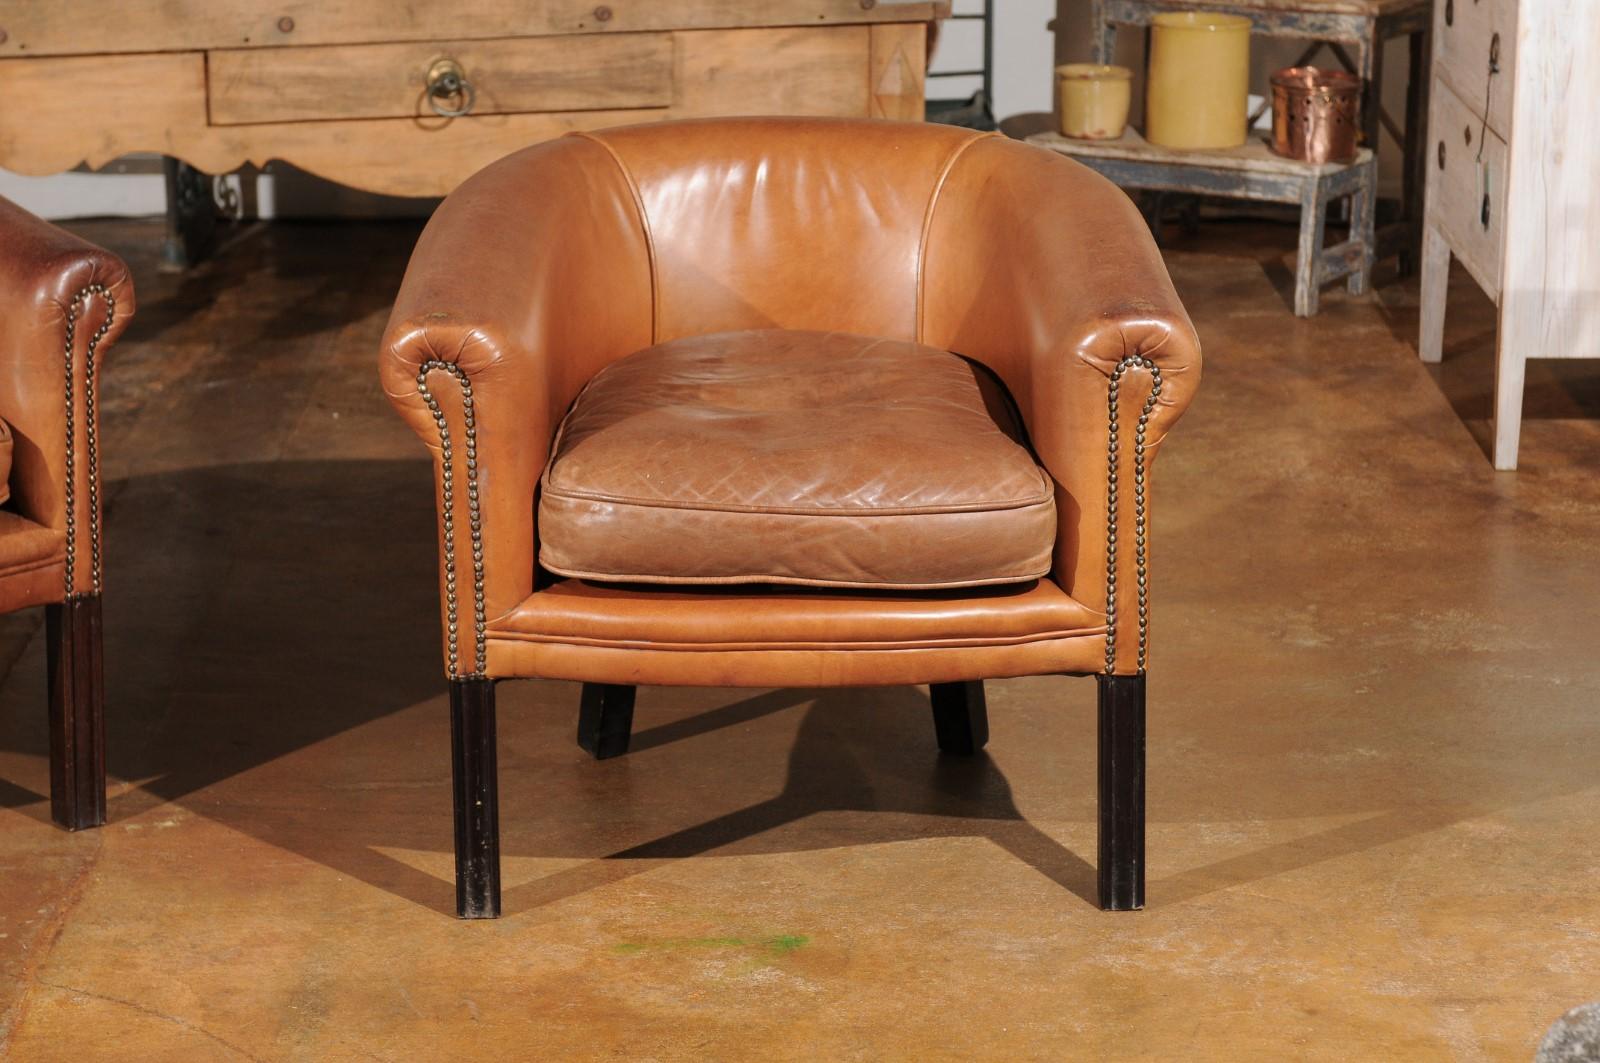 Brass Pair of Italian Vintage Caramel Leather Club Chairs with Cushion and Nailheads